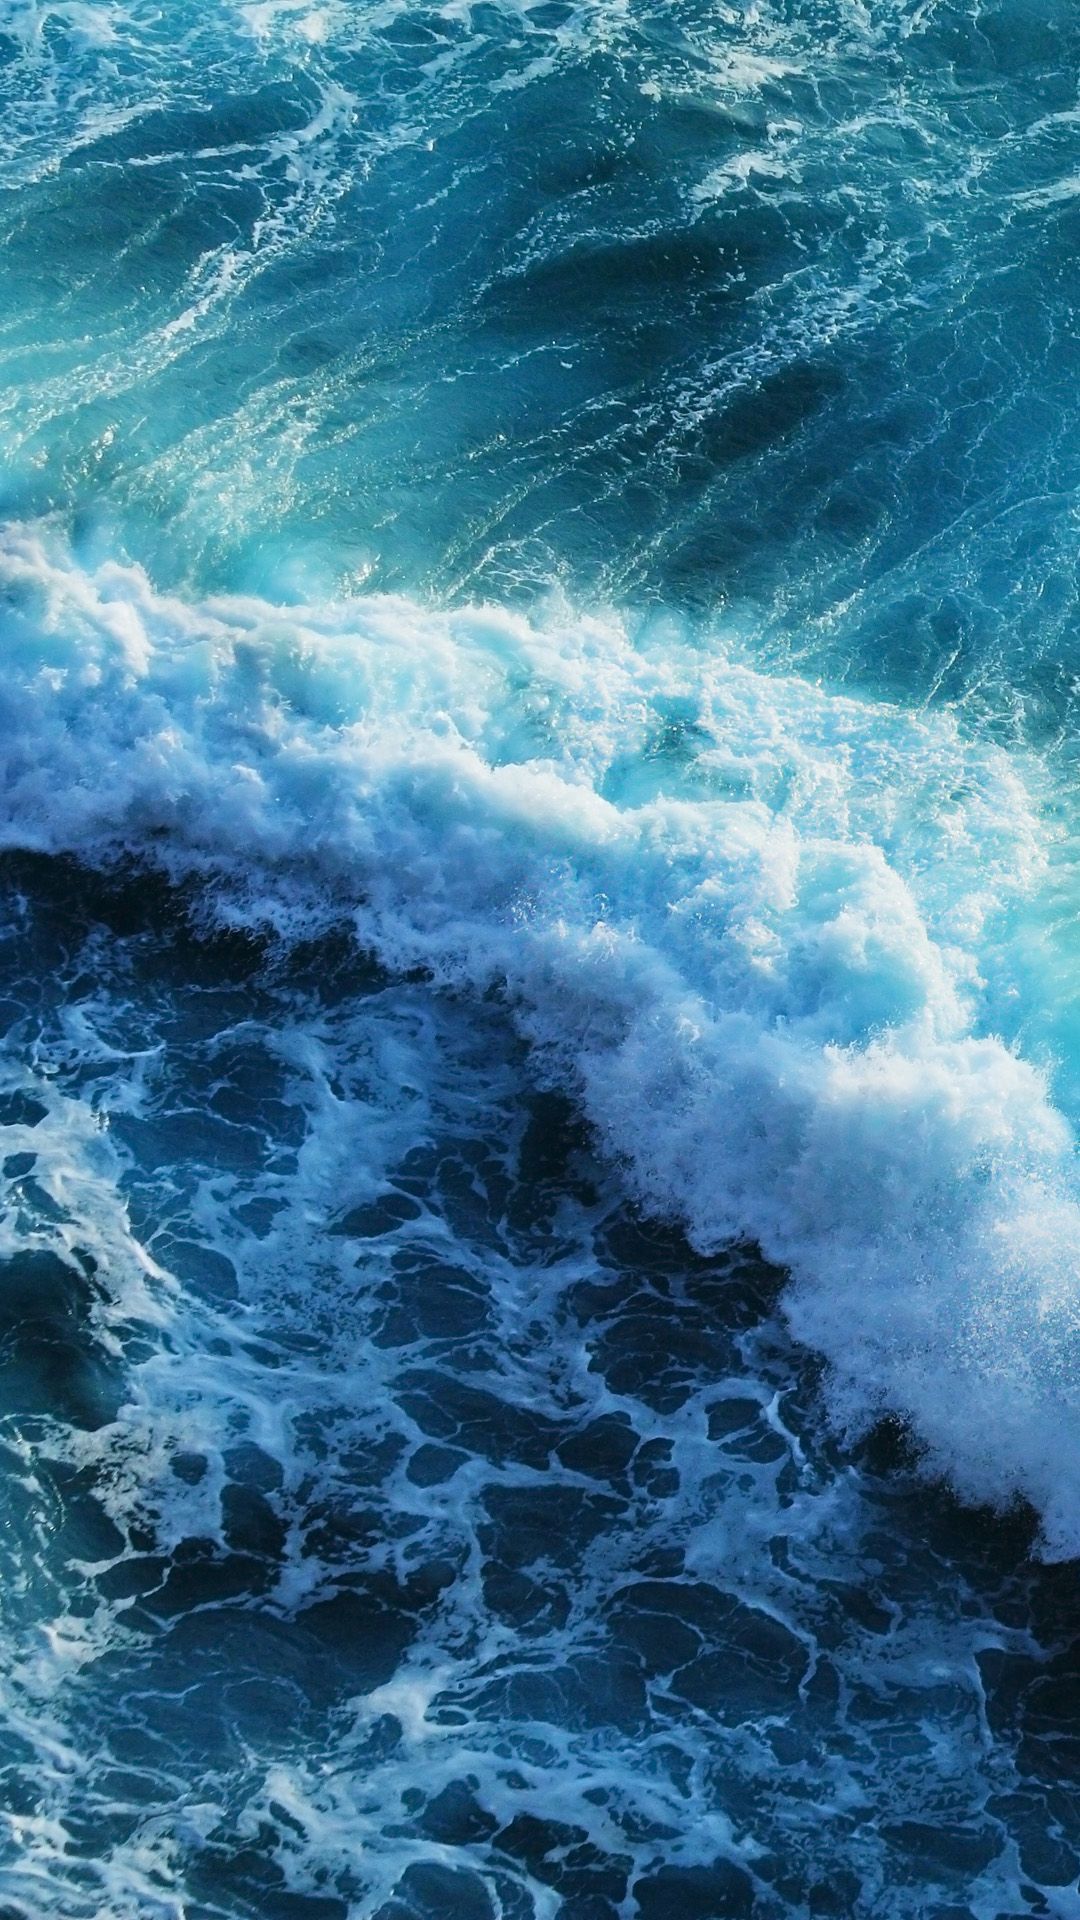 Aerial view of a large wave in the ocean - Wave